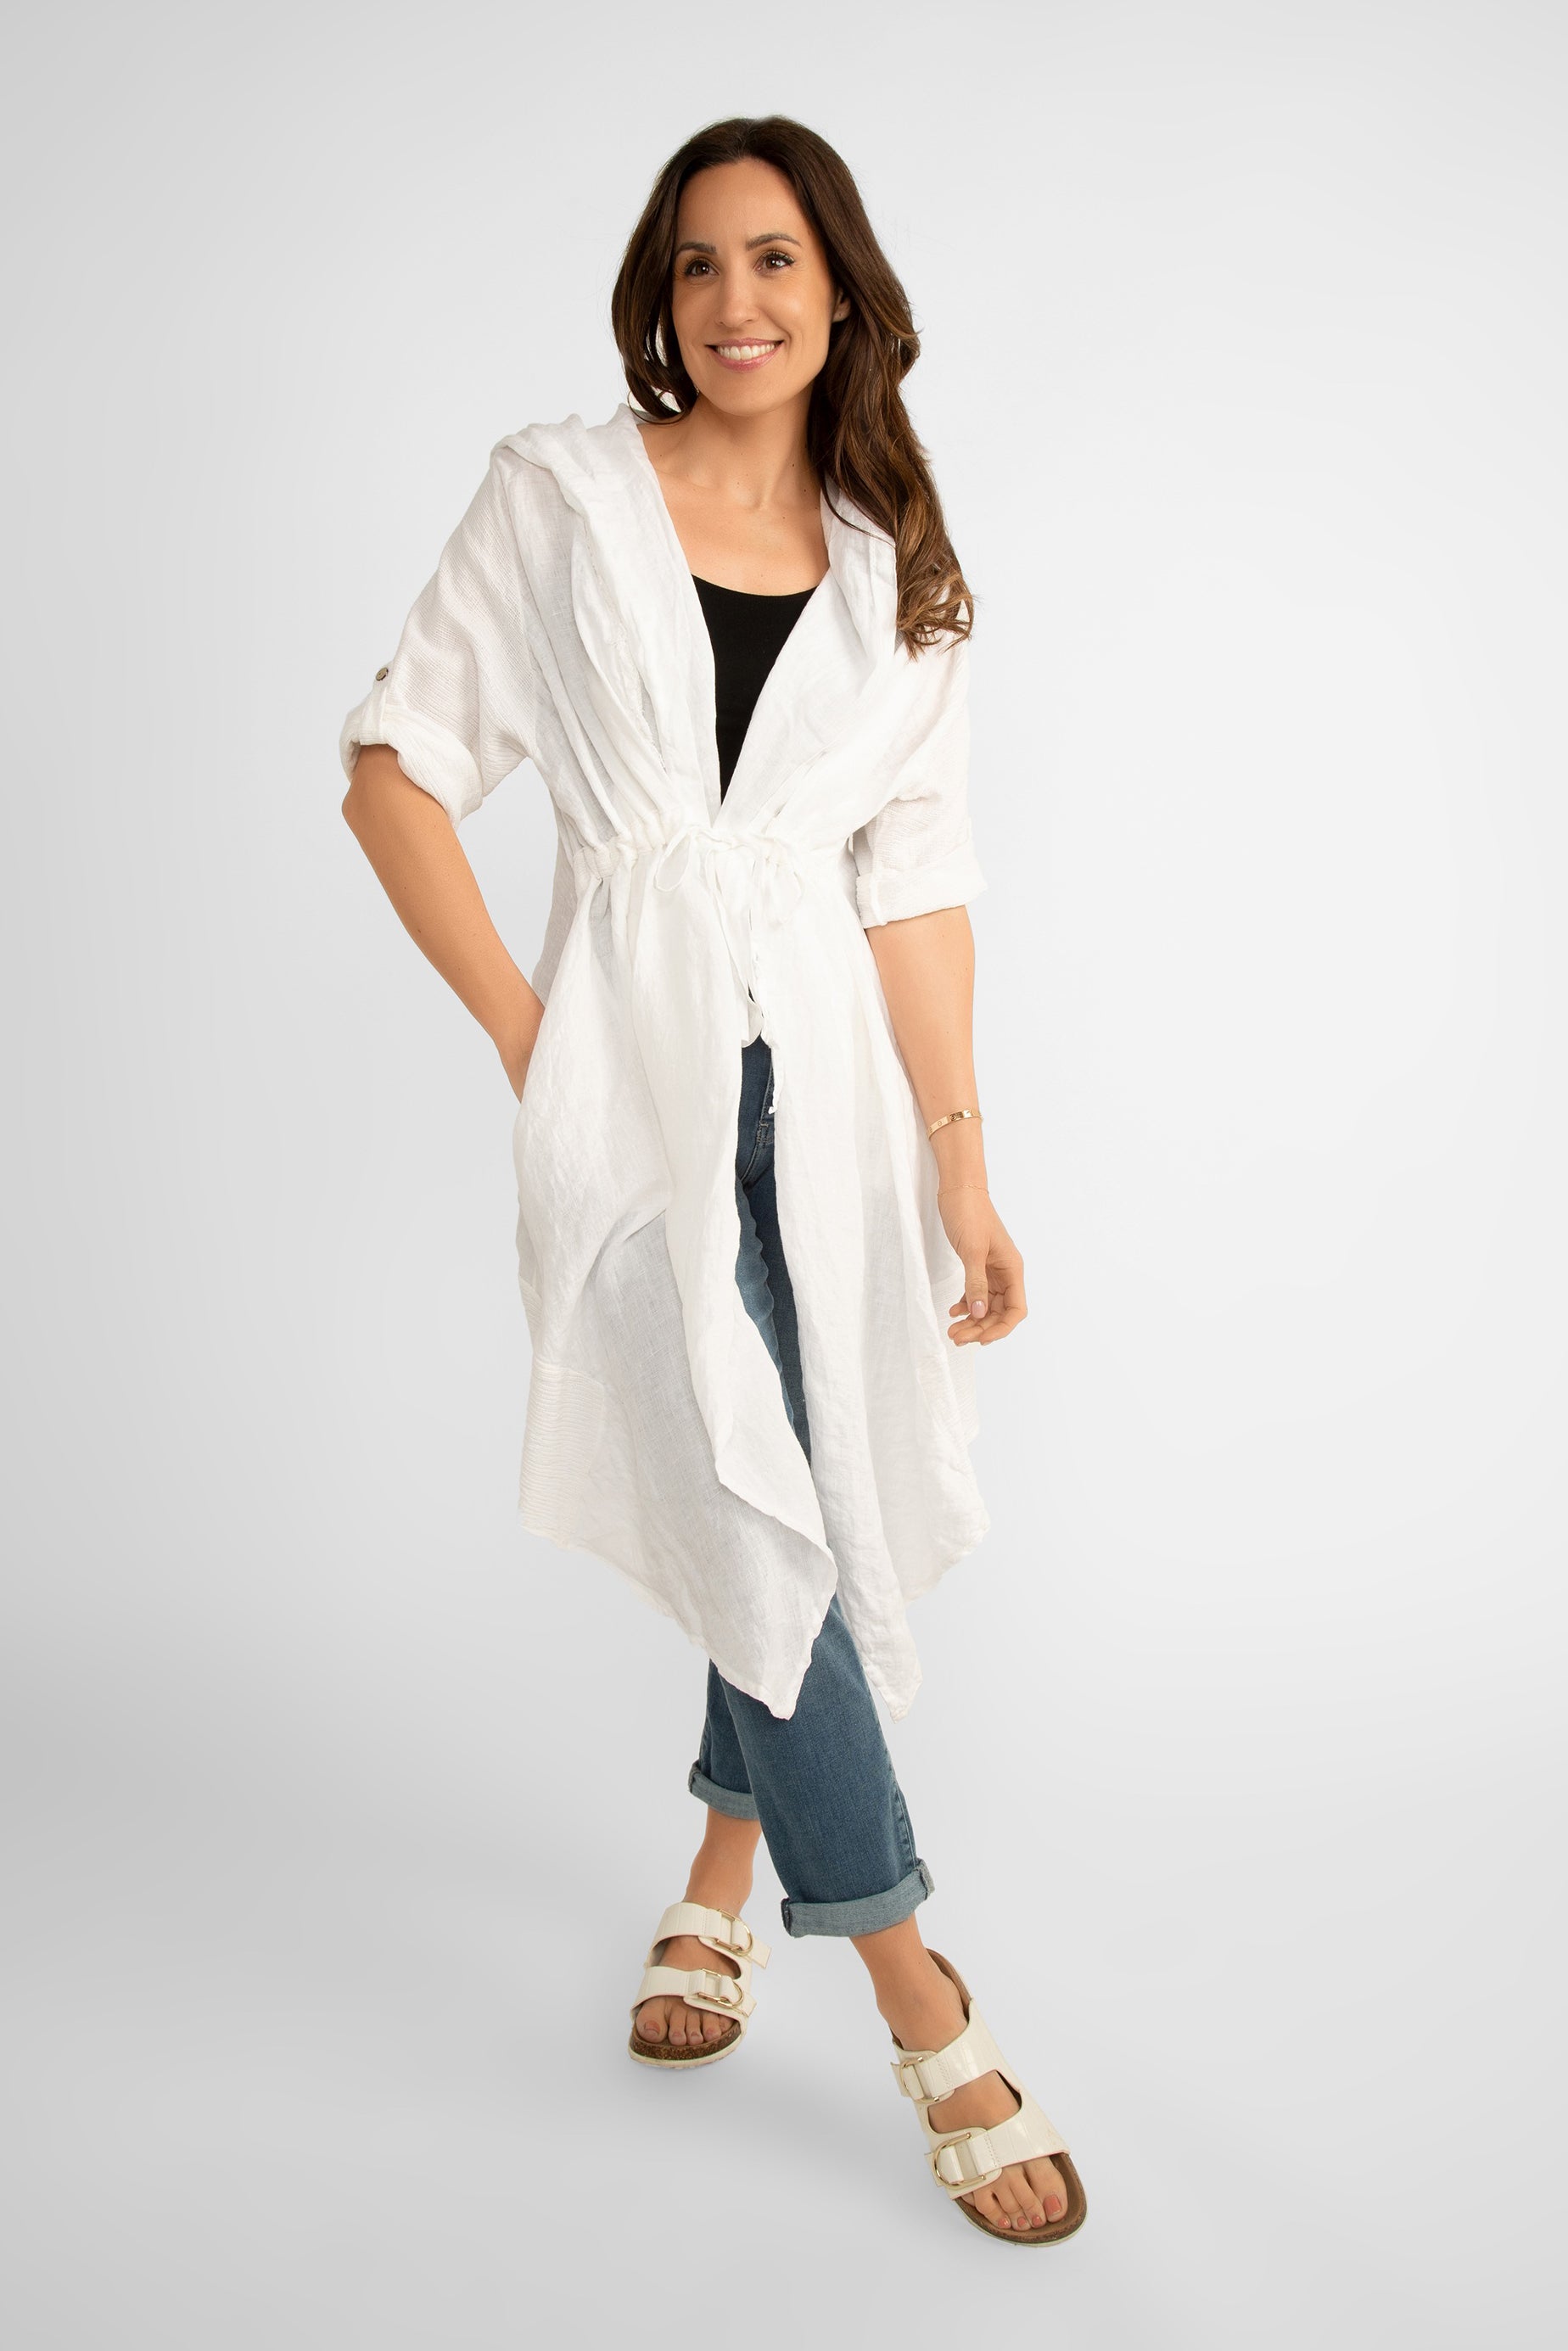 Me & Gee Women's Hooded Summer Cover-Up With Short Roll Tab Sleeves in White